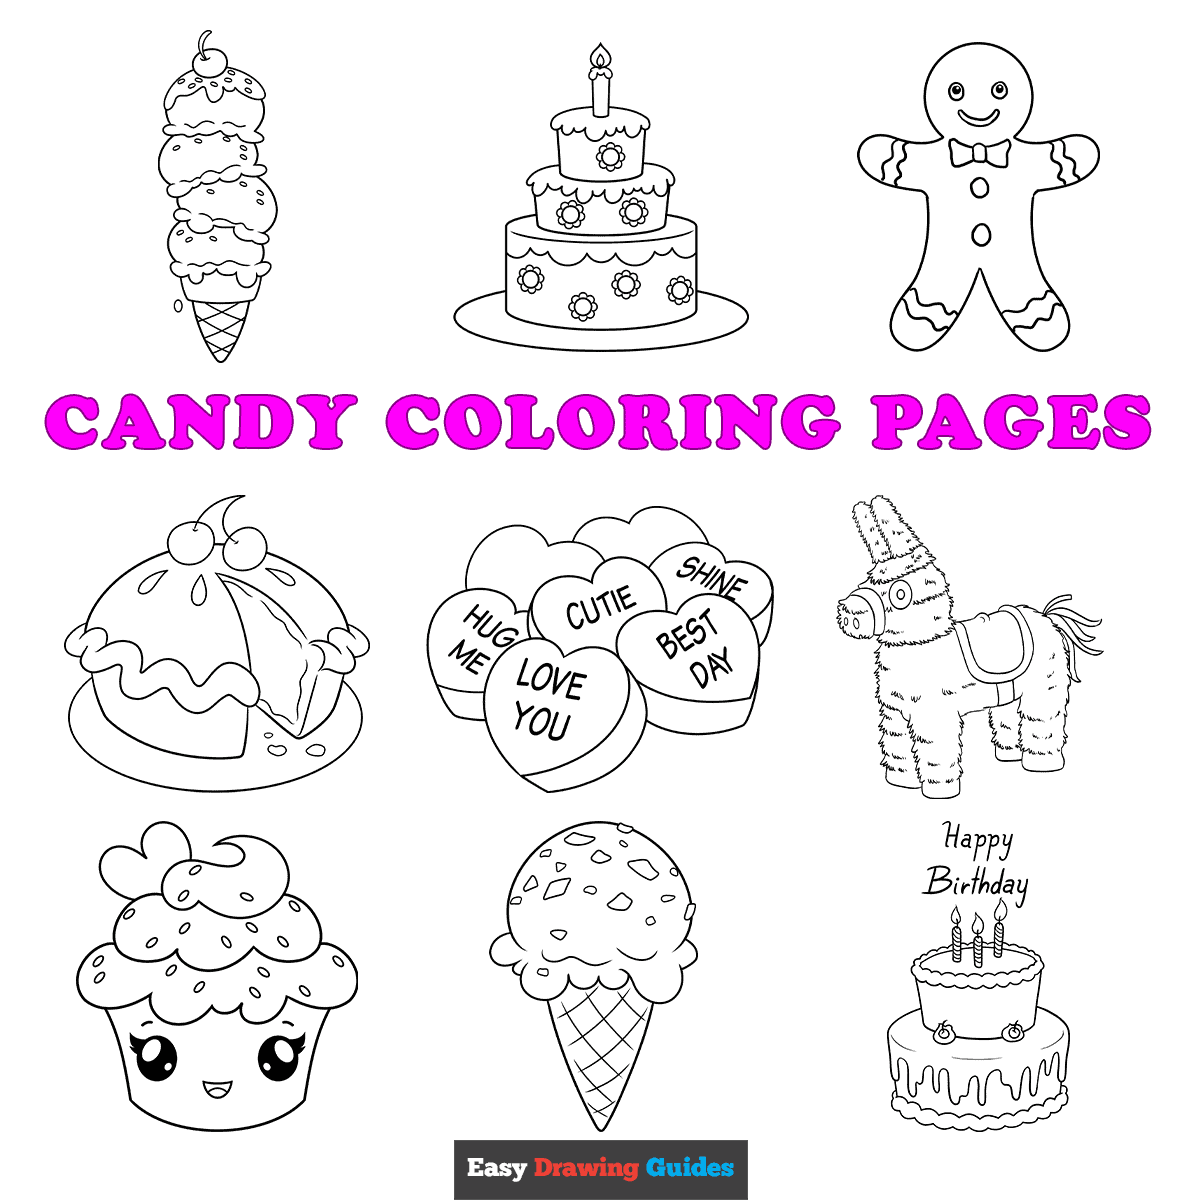 Free printable candy coloring pages for kids